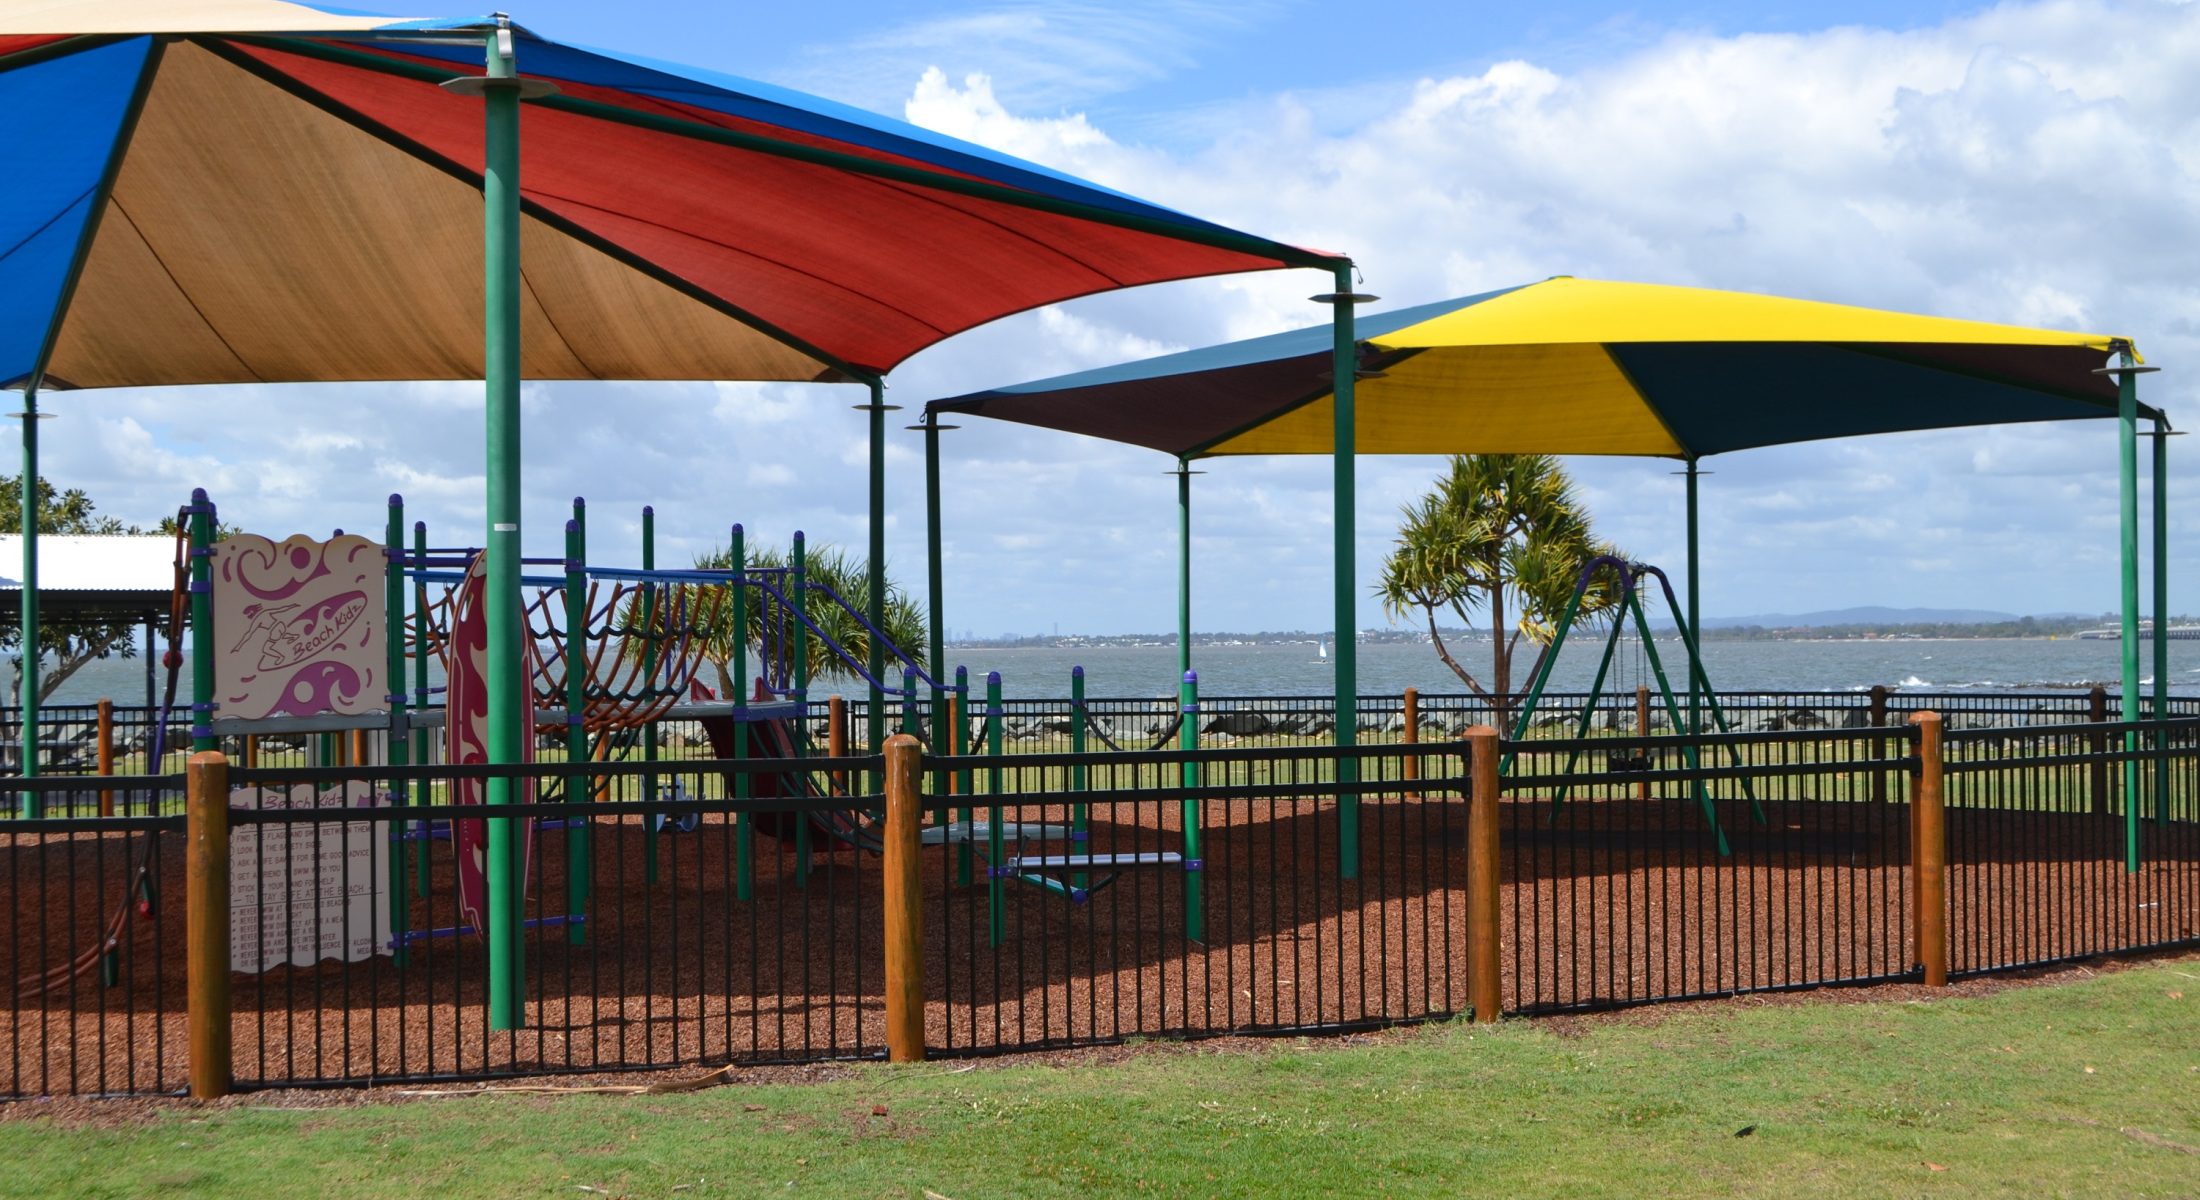 Playground at Pelican Park is fenced and has a Liberty Swing